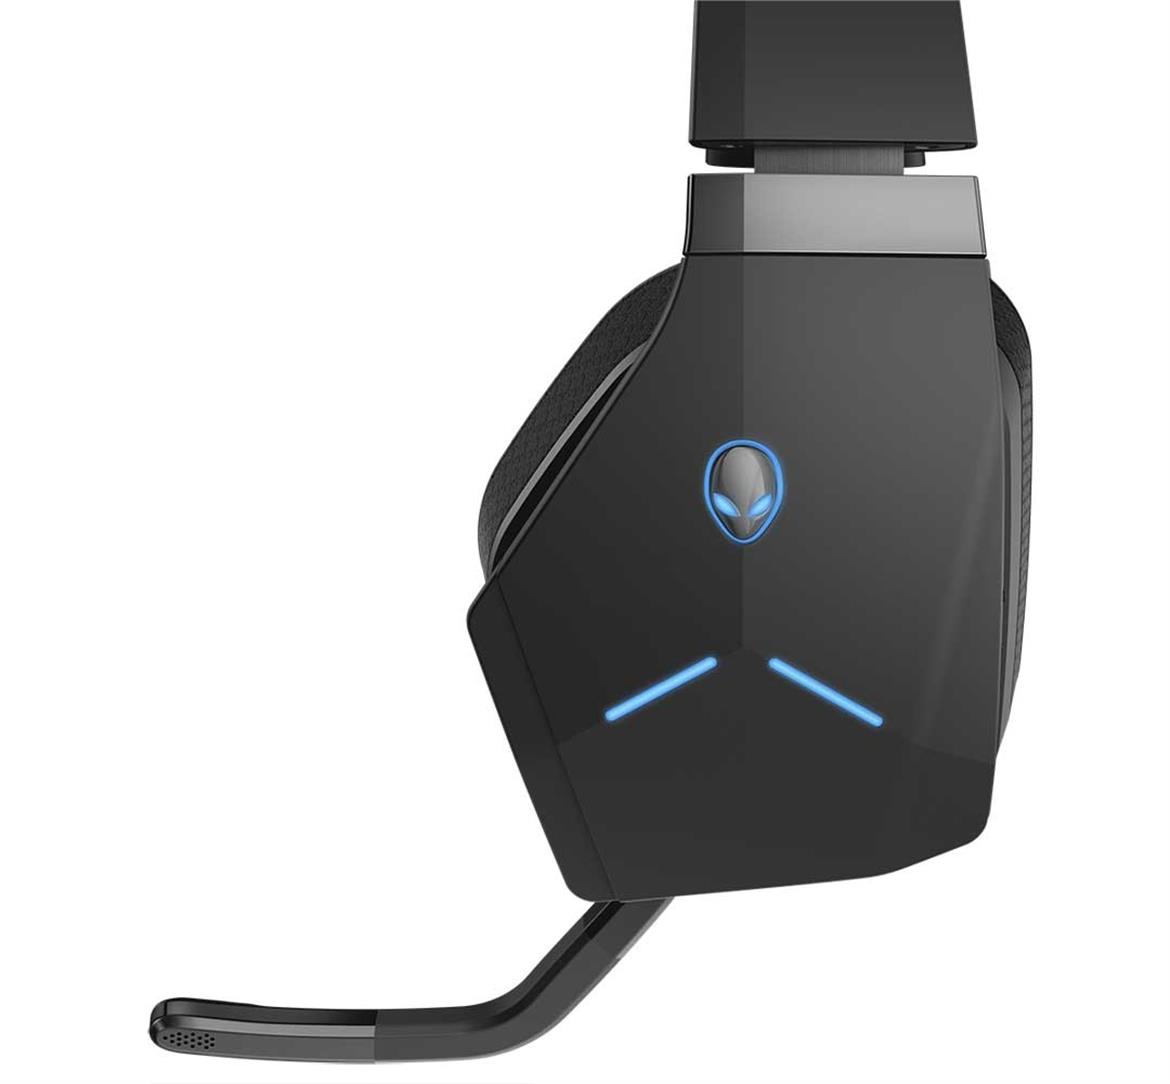 Dell Outs Ryzen Powered Inspiron Gaming Desktop, Alienware Elite Gaming Mouse And Headset Ahead of E3